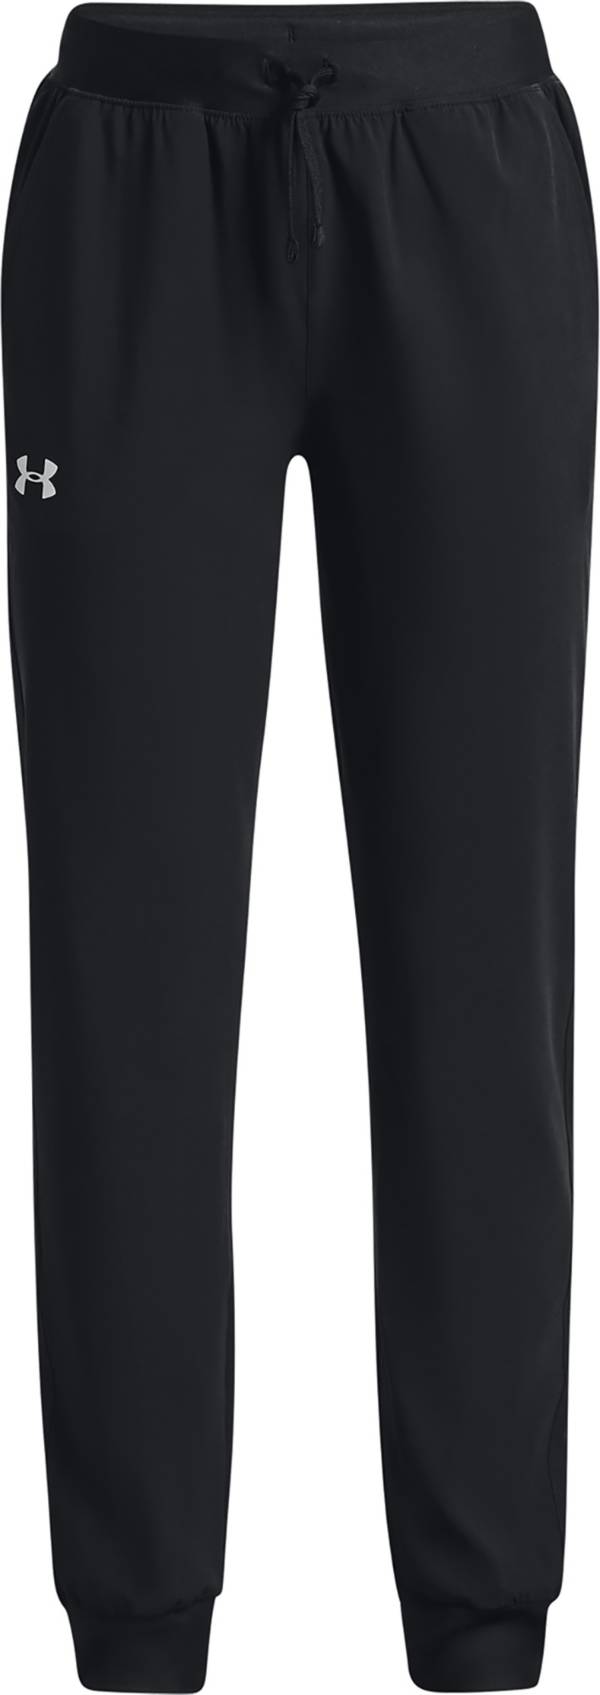 Under Armour Girls' Sport Woven Pants product image